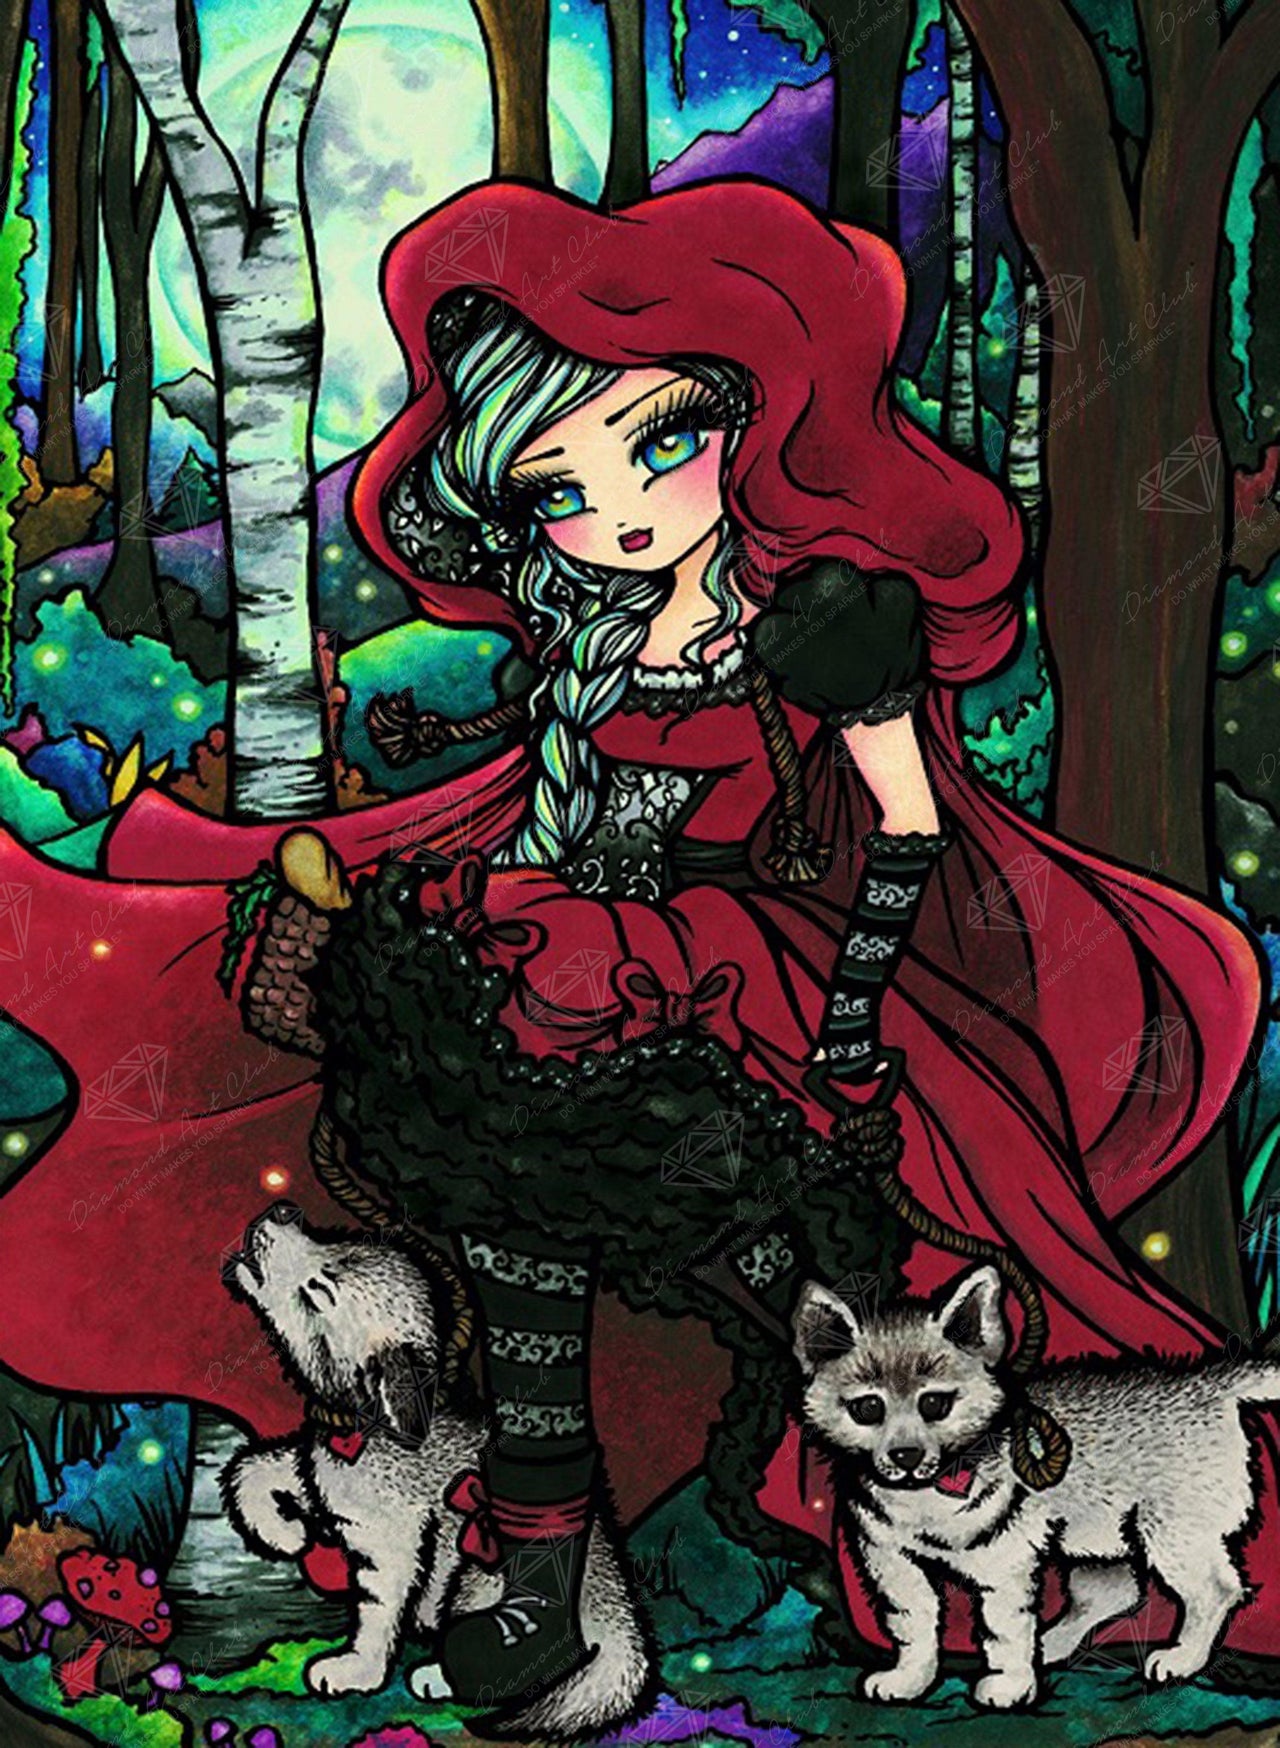 Diamond Painting Red Riding Hood 22" x 30″ (56cm x 76cm) / Round with 42 Colors Including 2 ABs